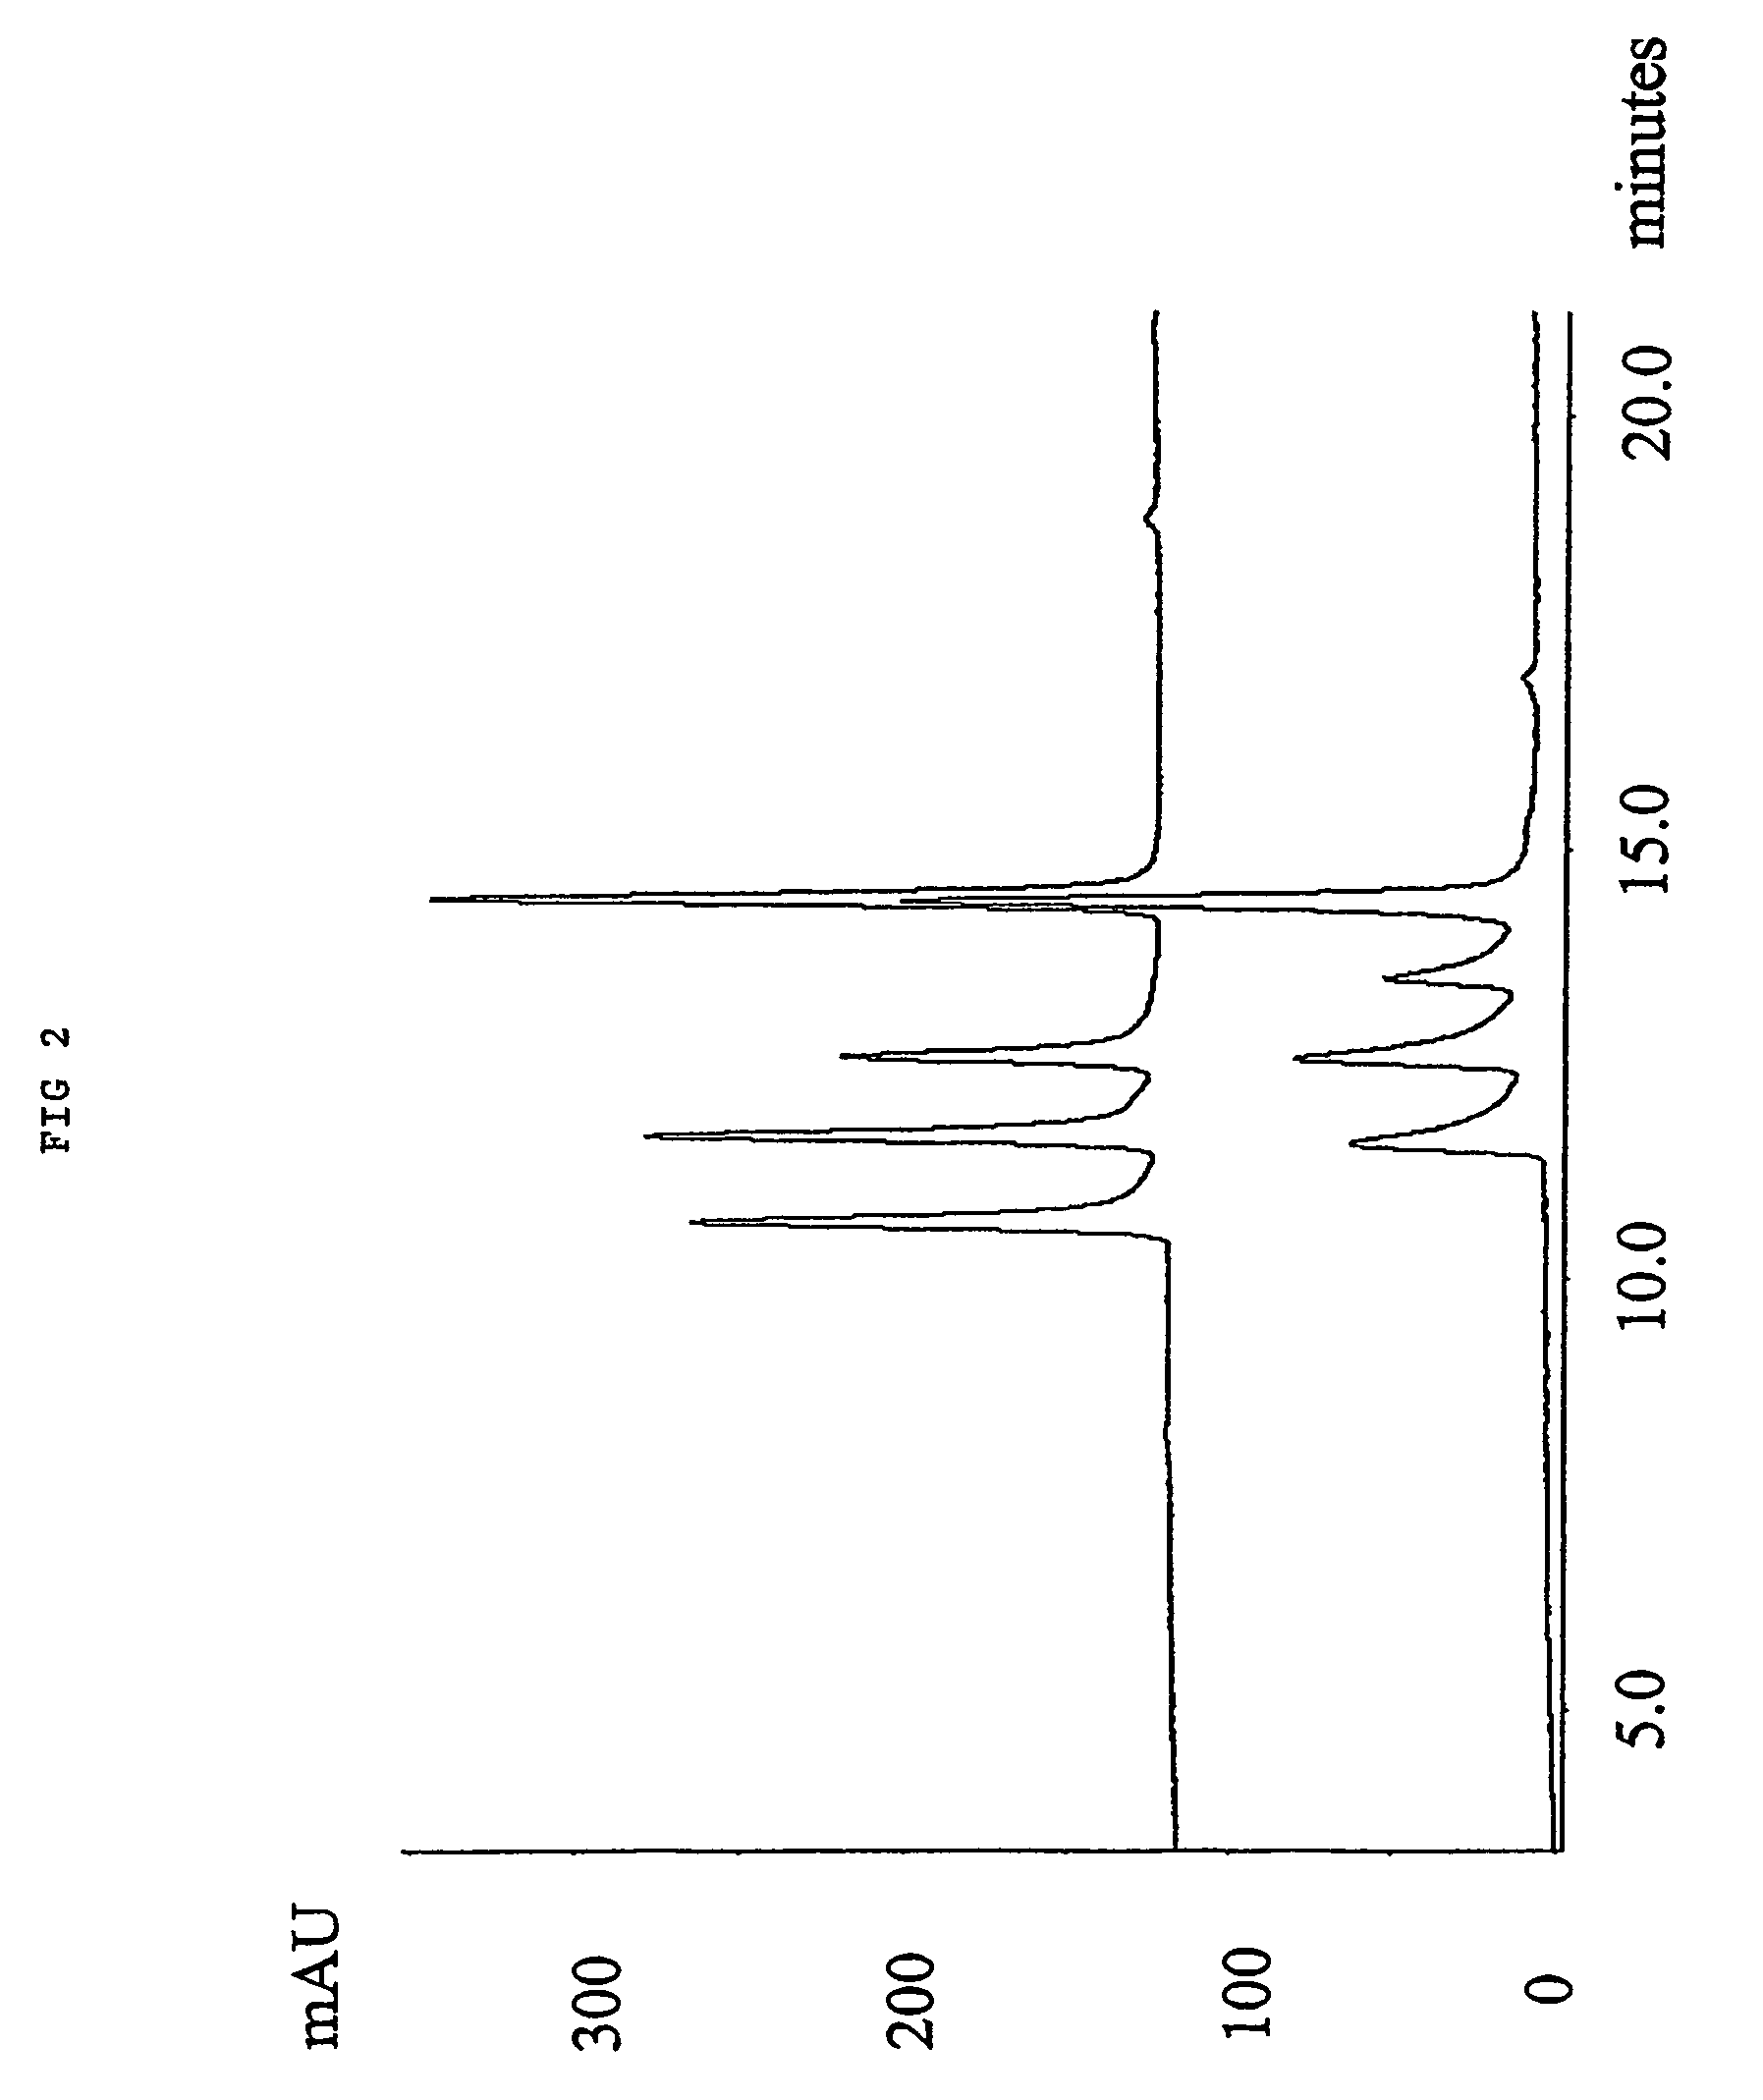 Post-modification of a porous support